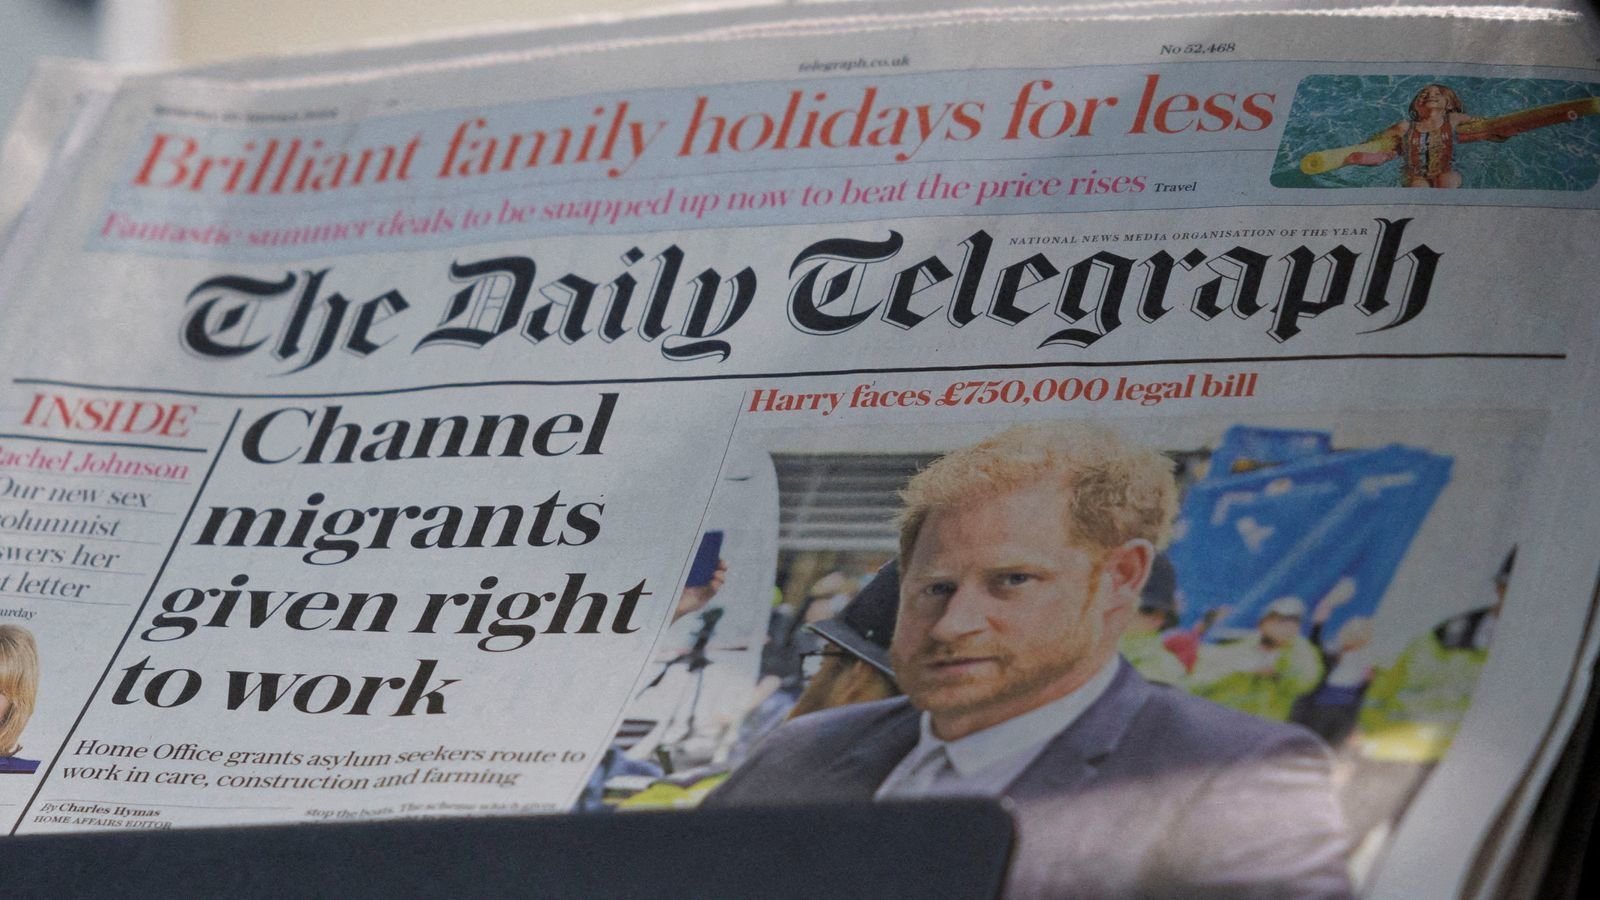 Gulf State-Backed Fund Abandons Bid to Buy The Daily Telegraph Amidst Government Intervention